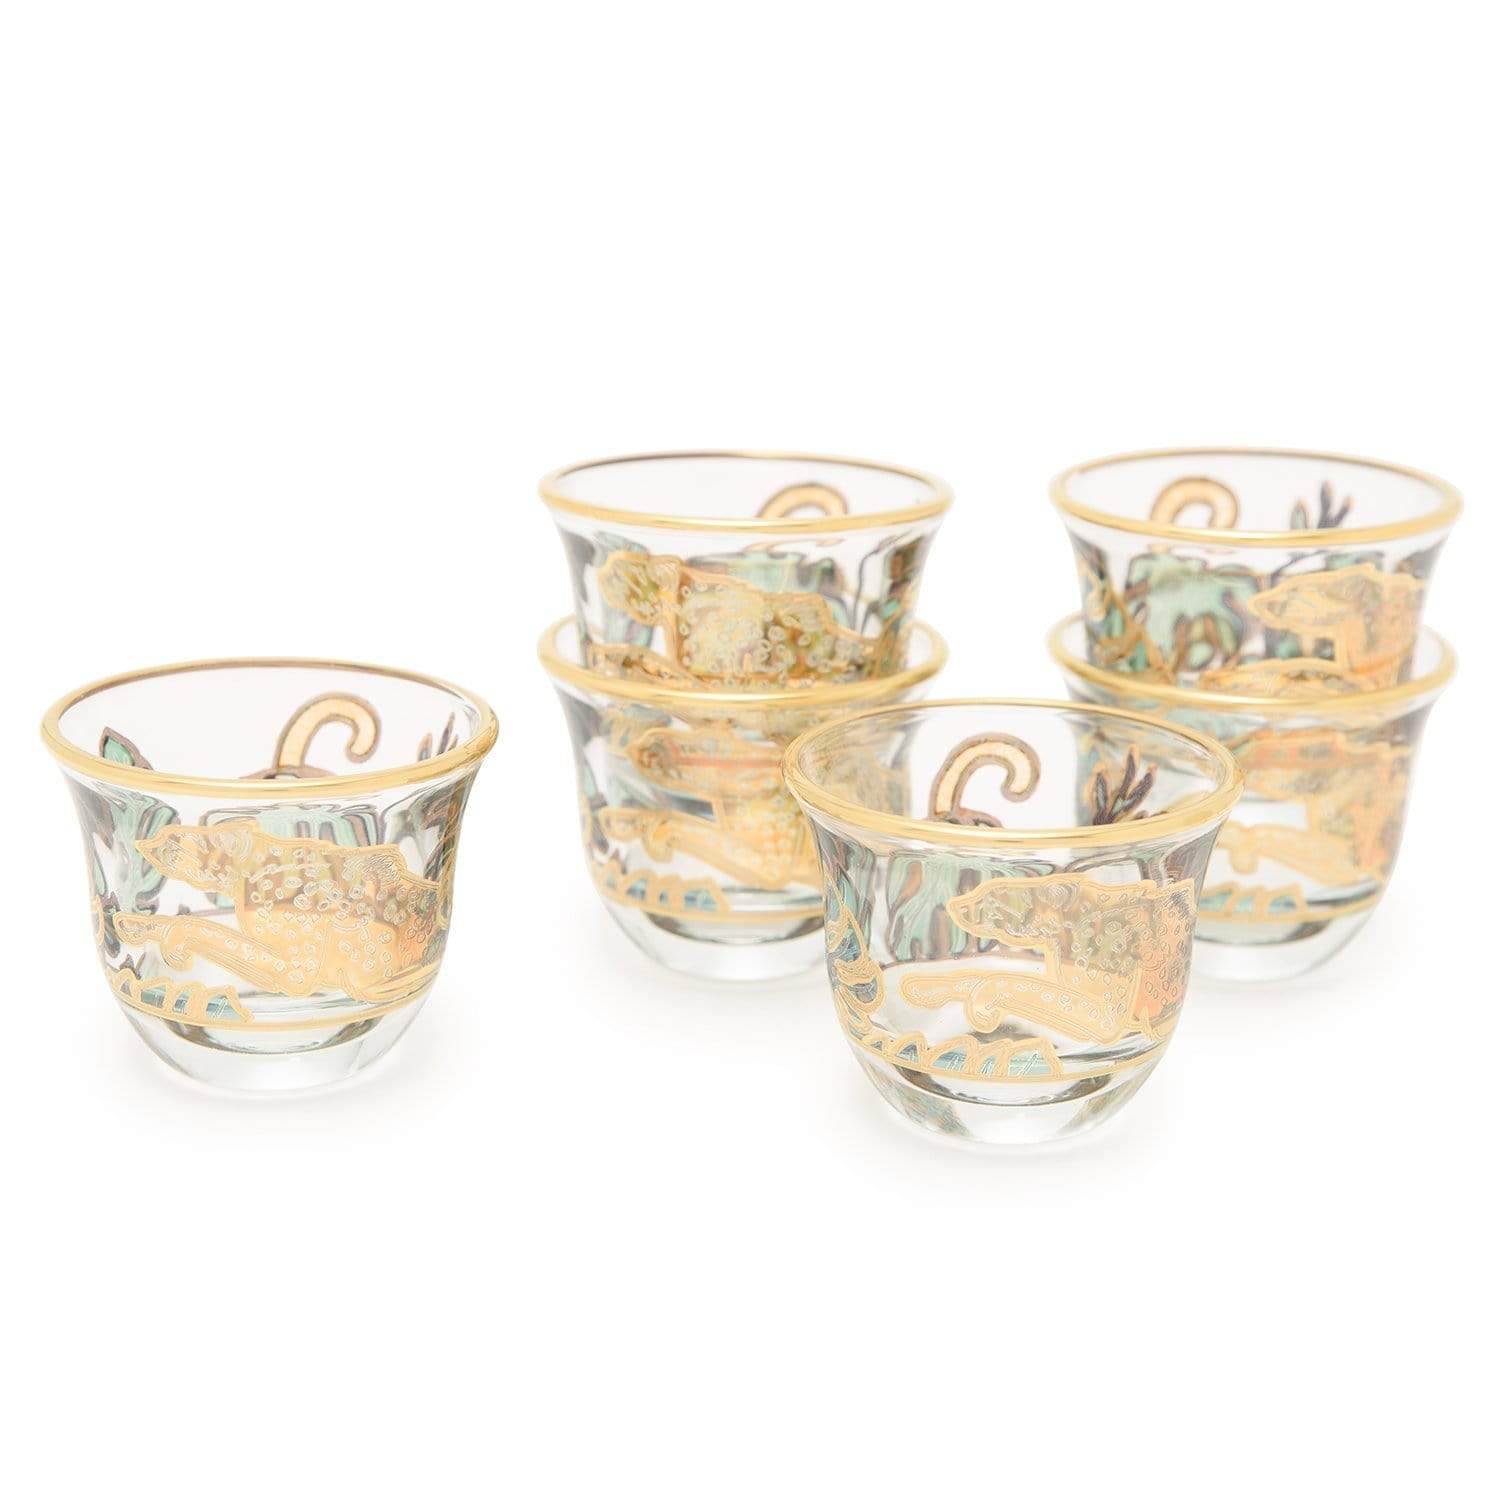 Combi Lesley Mocca Cup Set - Green and Gold - G748Z/48 - Jashanmal Home